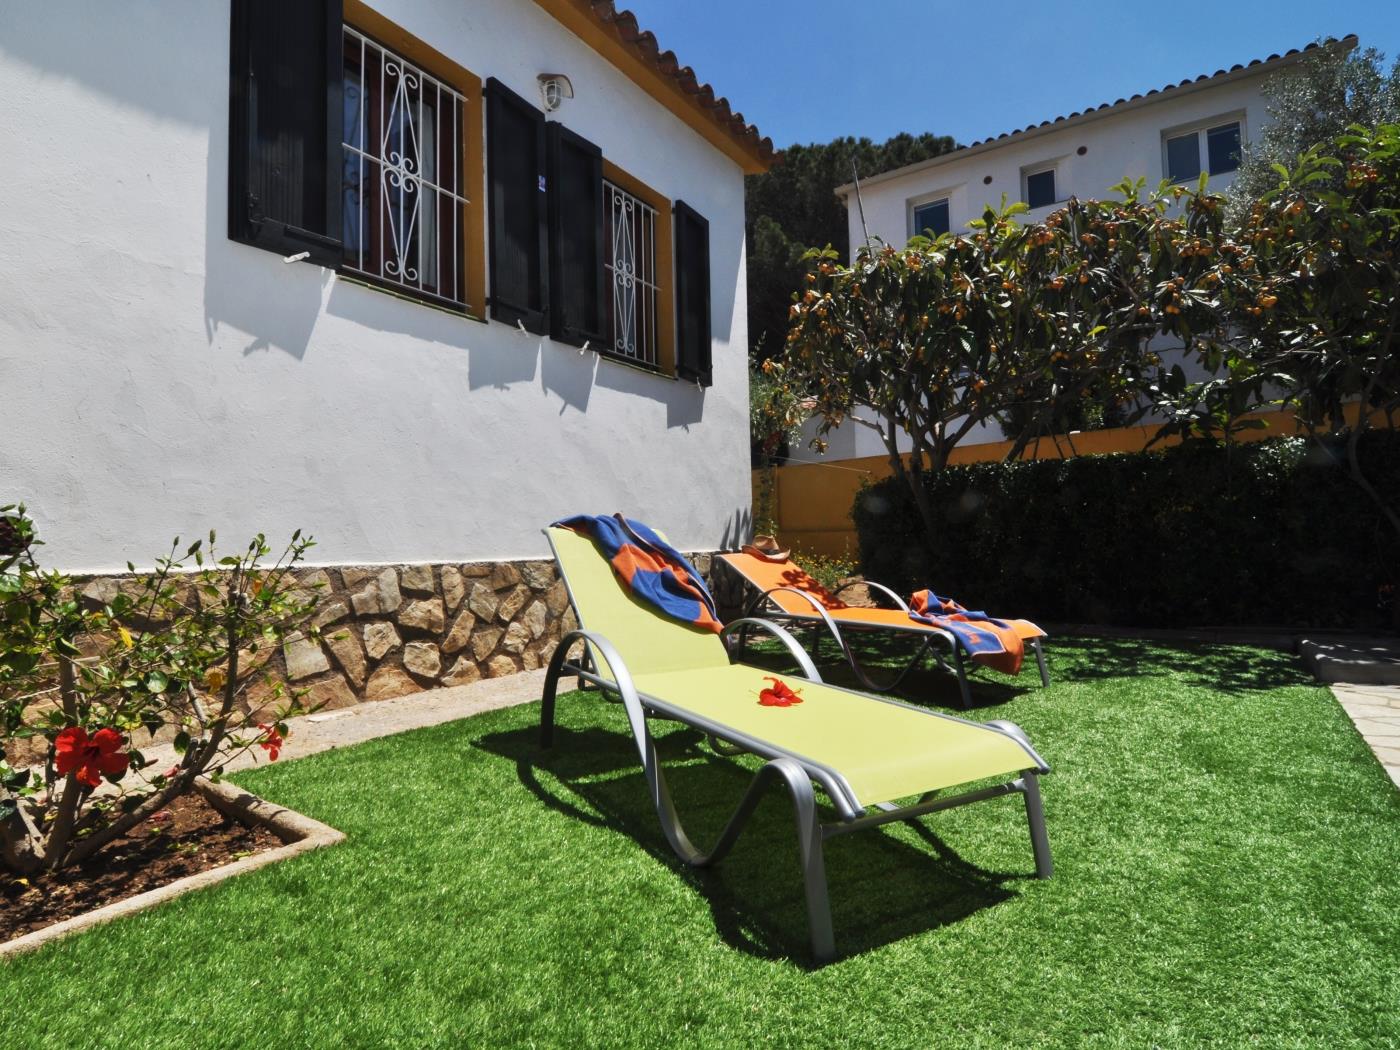 House with private pool to 500 metres from the beach. in l'Escala